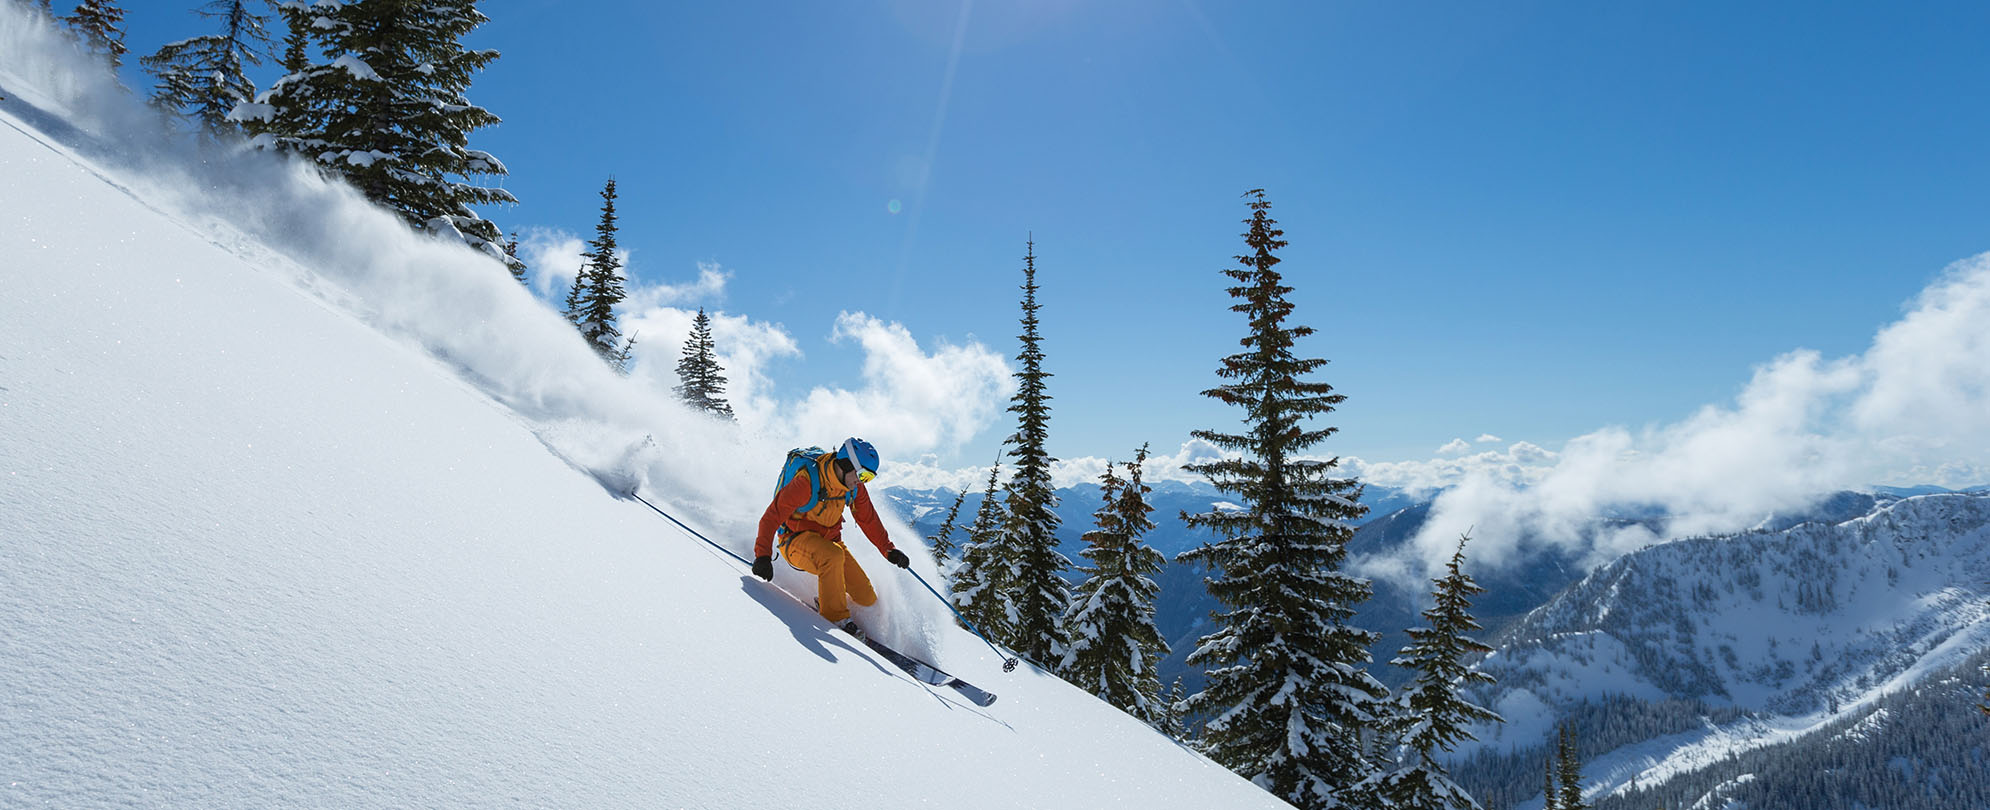 A skier going down a slope with mountains and tall evergreen trees in the background in Whistler, Colorado.